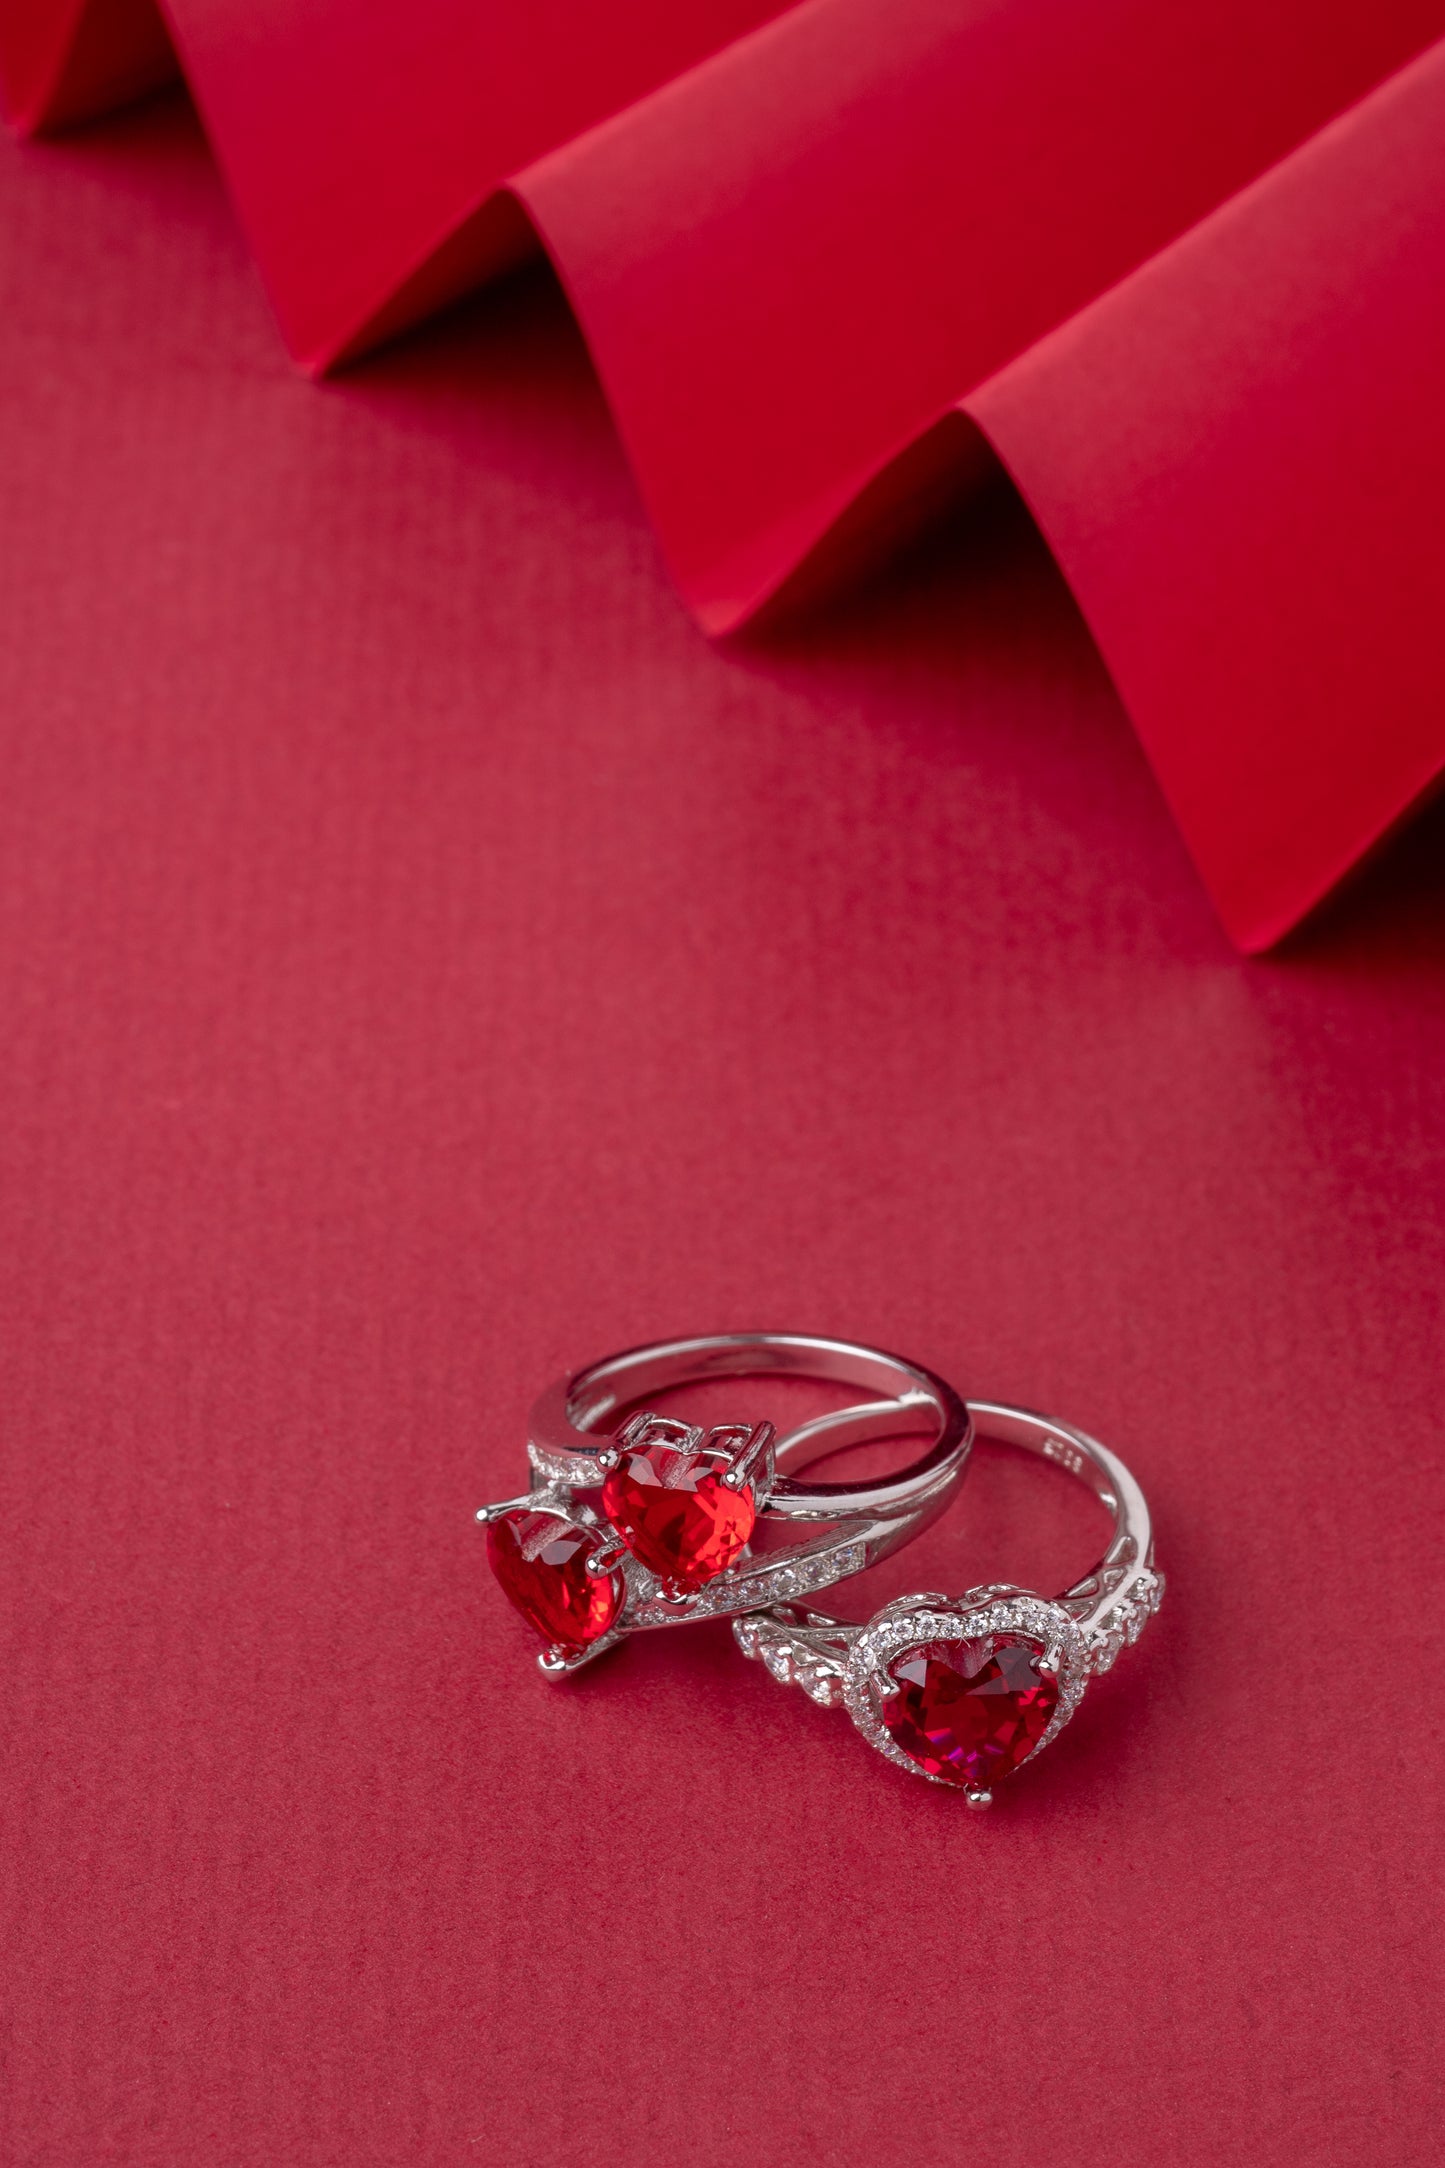 Real Heart Shaped Ruby Ring